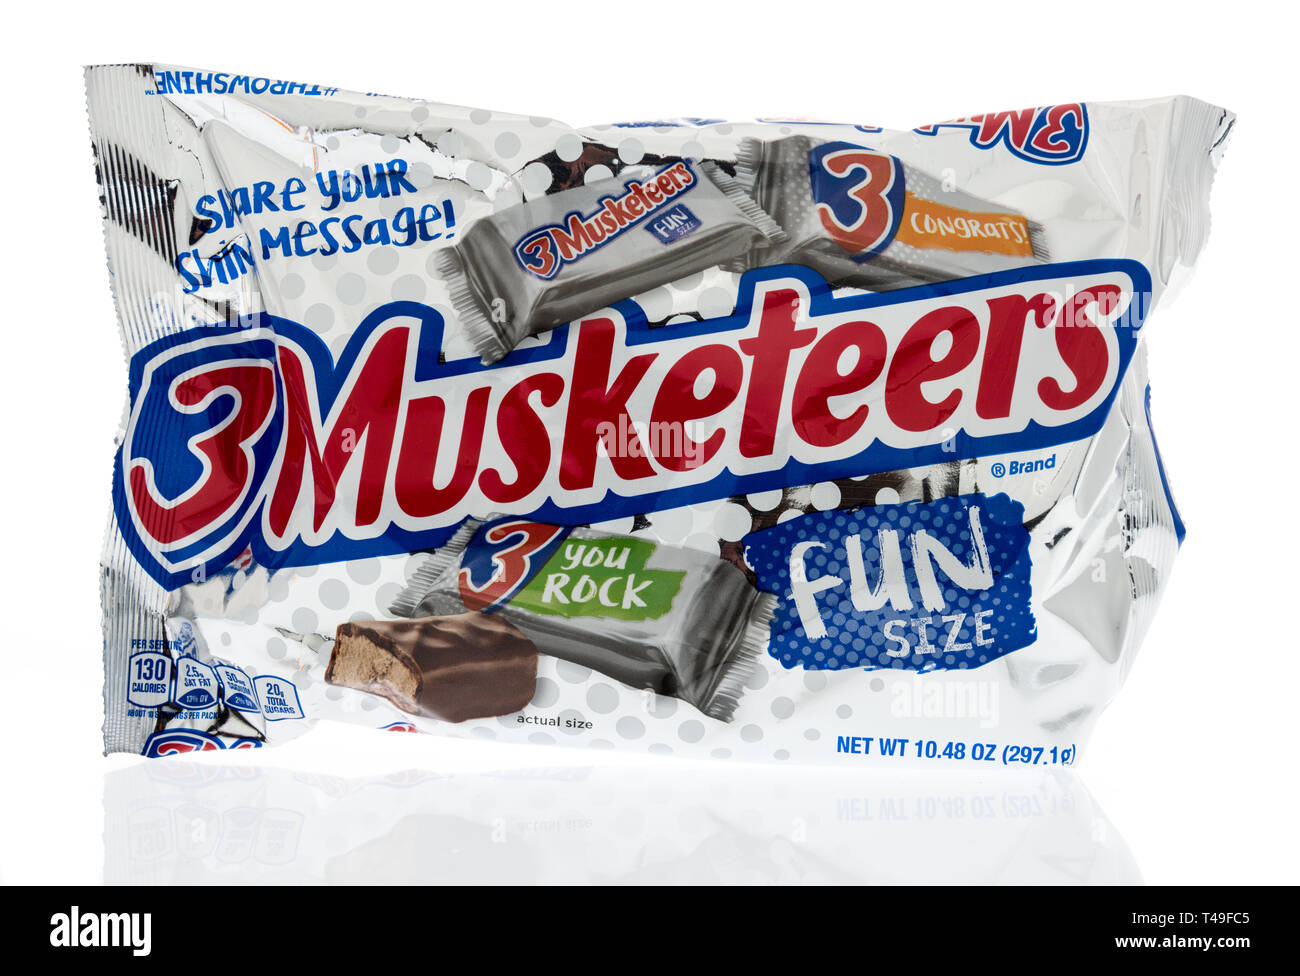 Winneconne, WI -  13 April 2019: A bag of 3 Musketeers candy bars on an isolated background Stock Photo